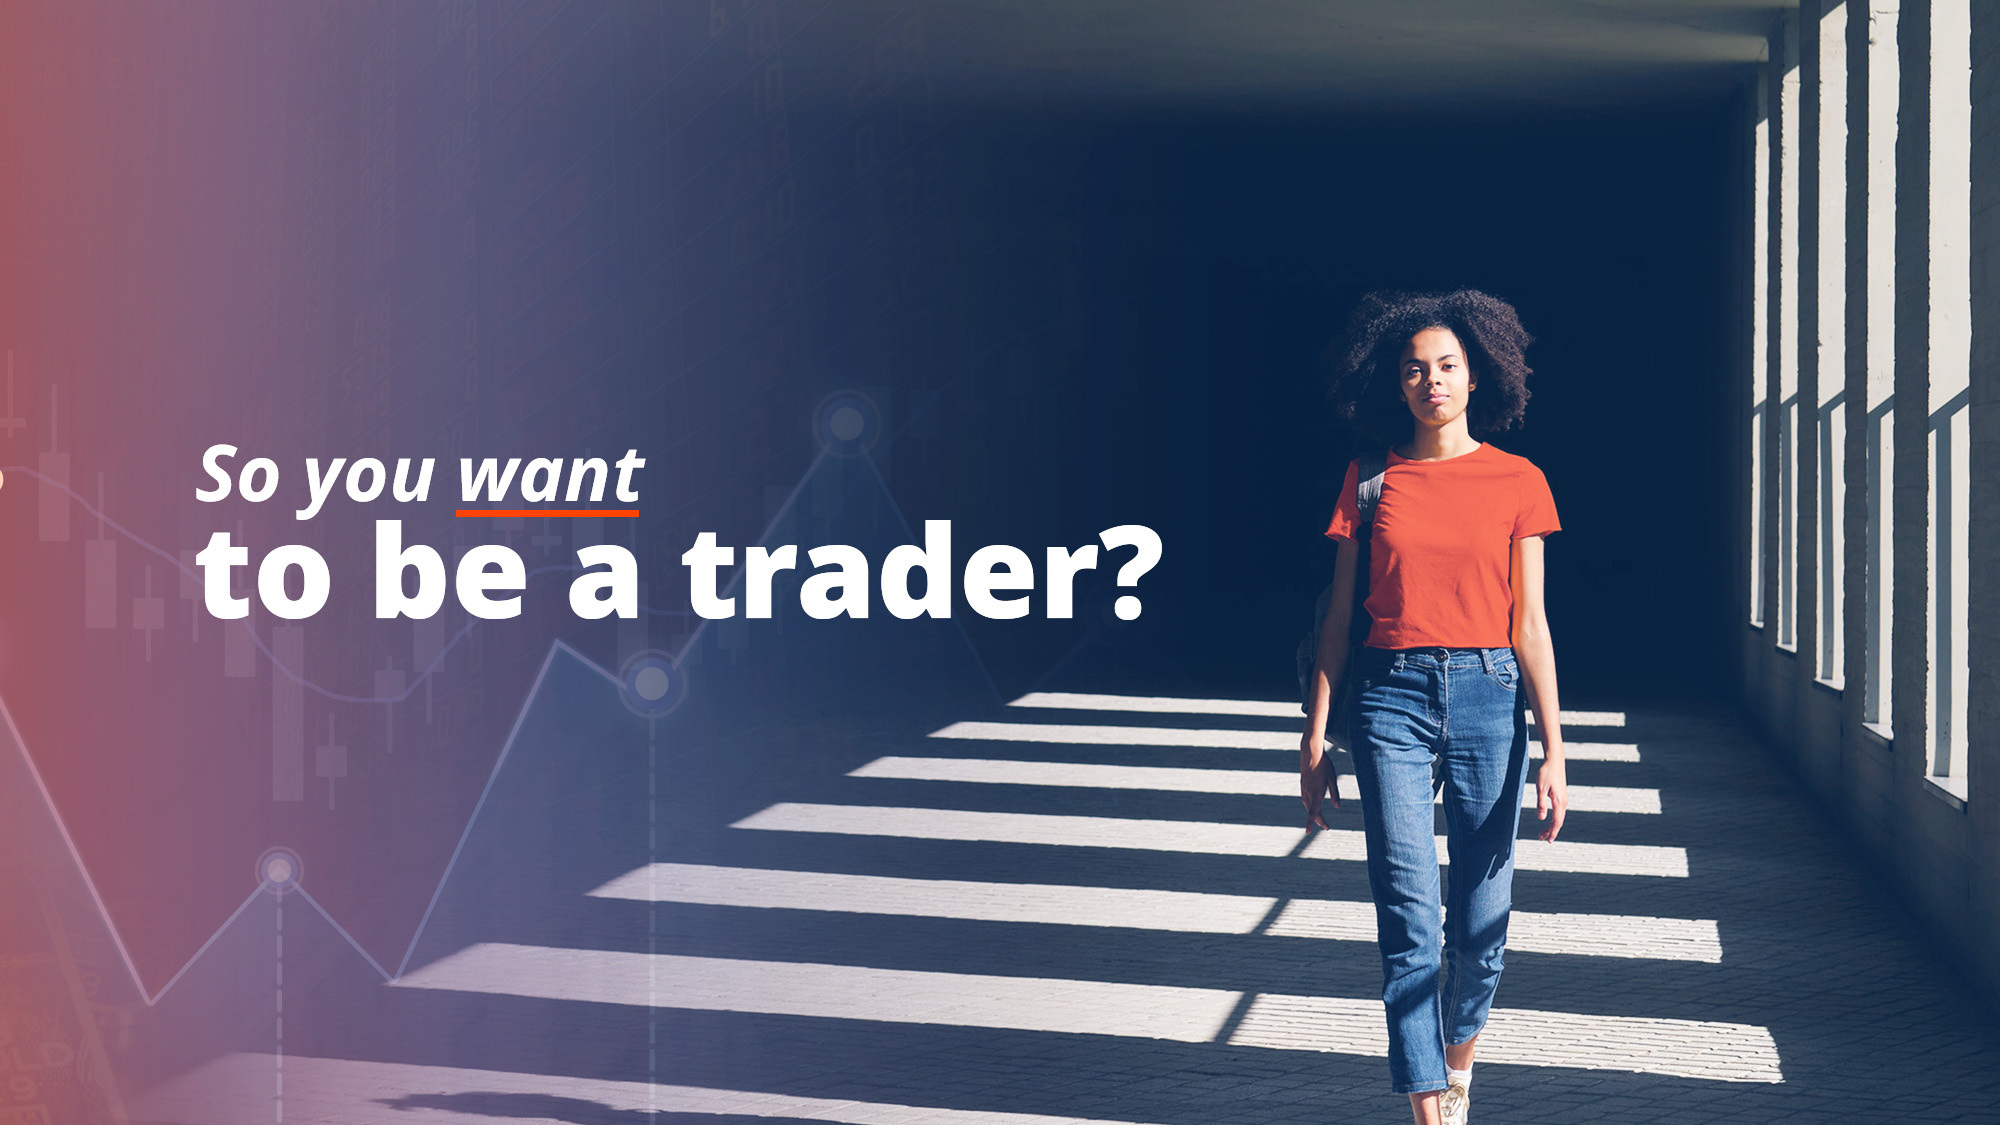 So you want to be a trader?